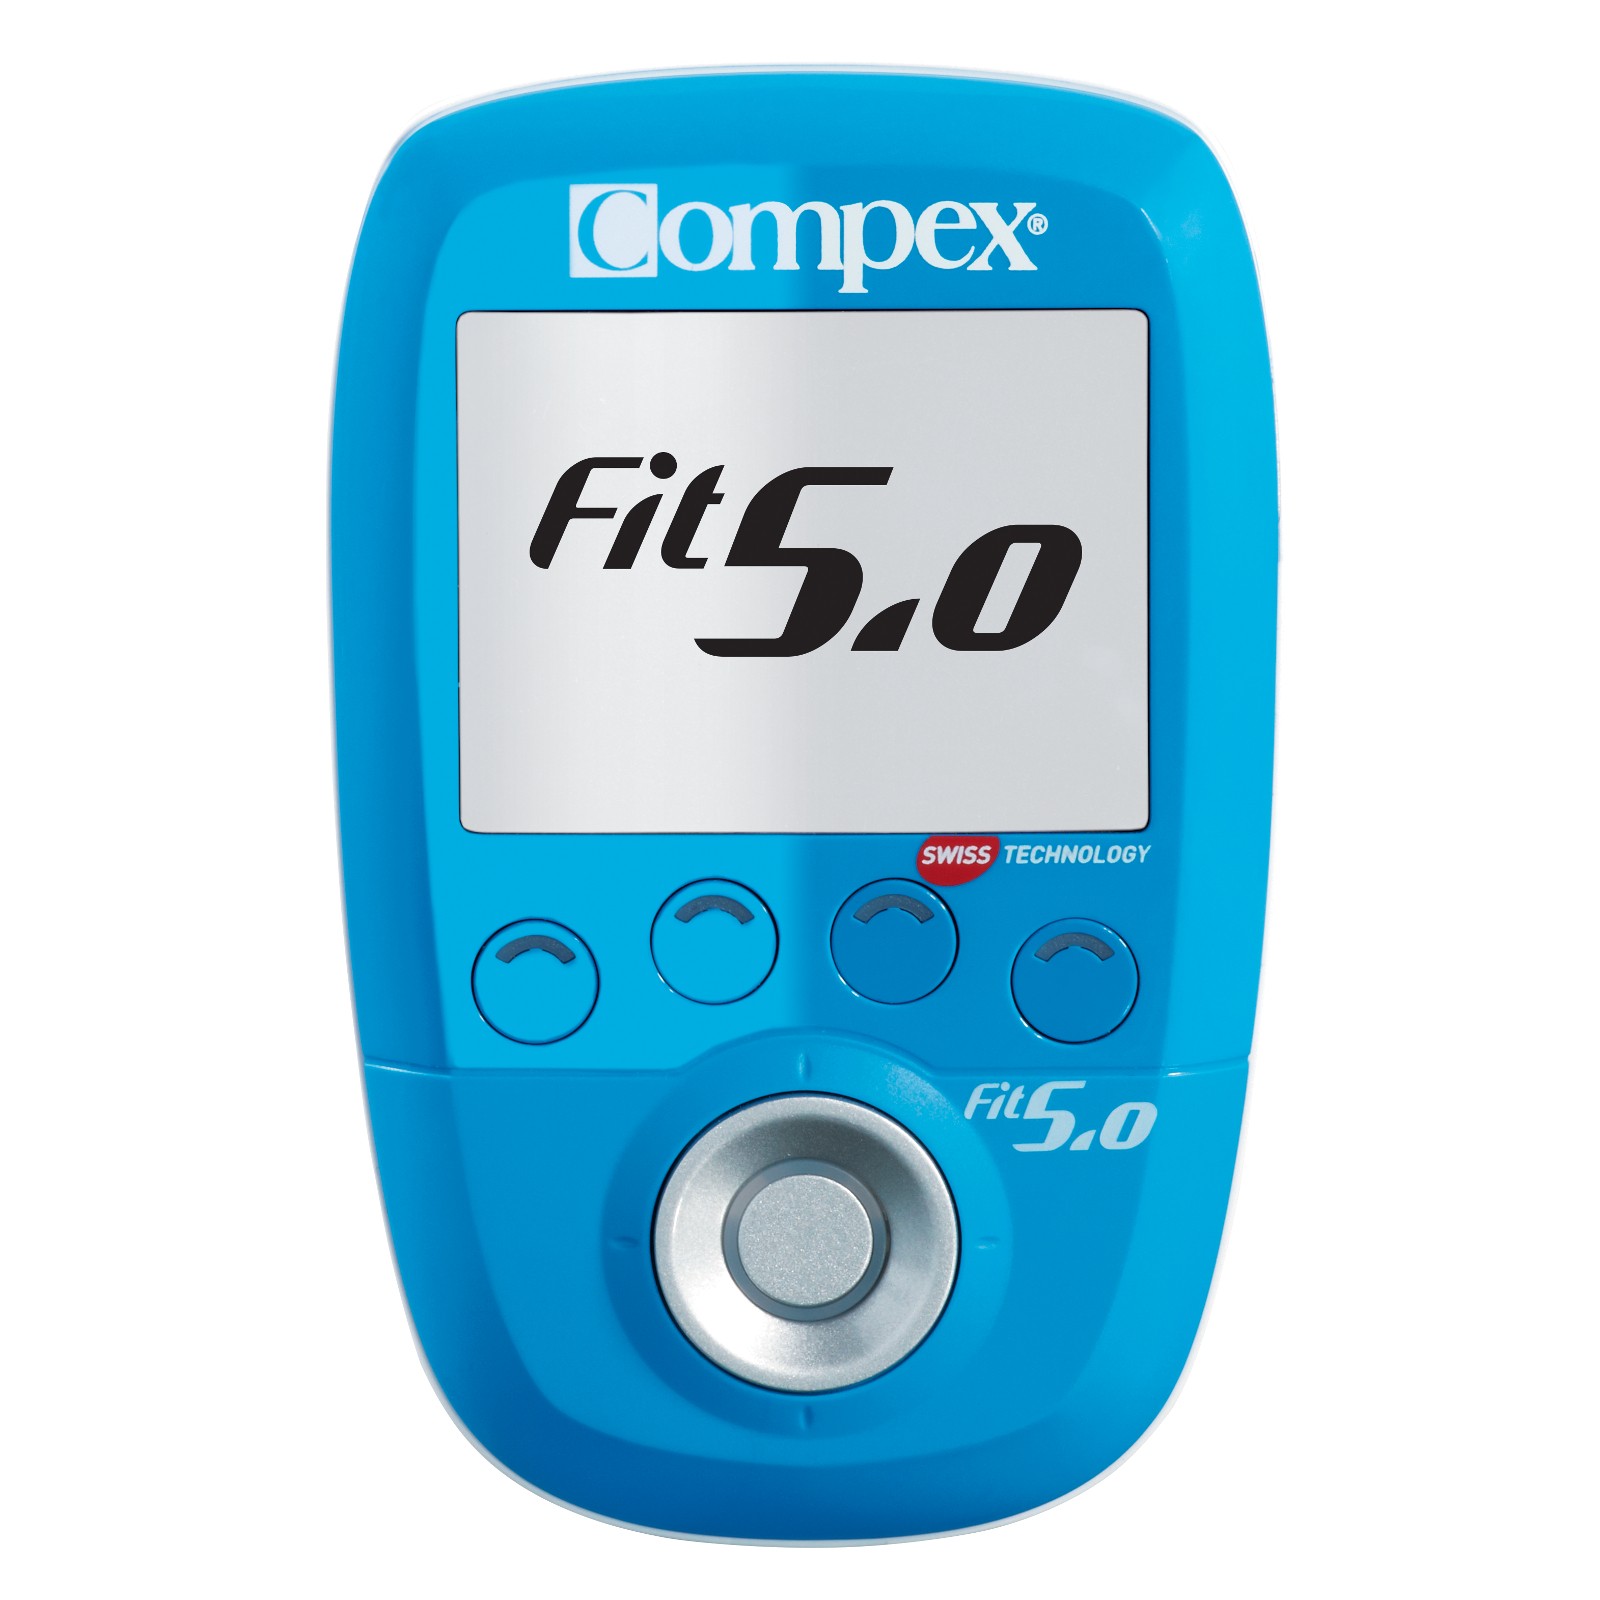 Compex Fit 3.0 (1 stores) find prices • Compare today »